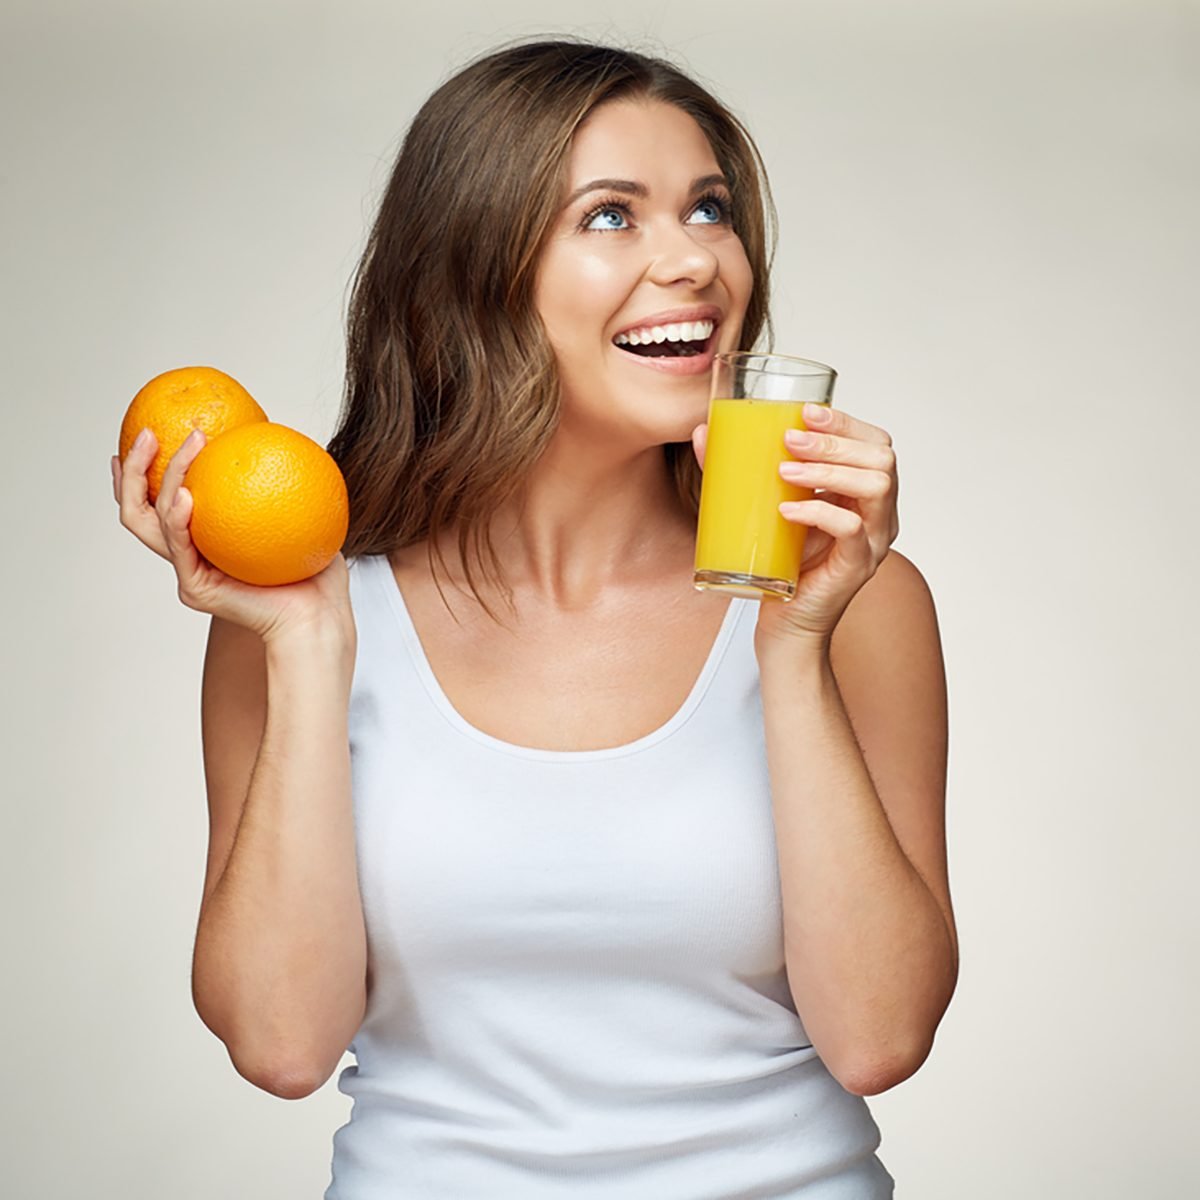 Here Is Why You Should Drink A Glass Of Orange Juice Everyday